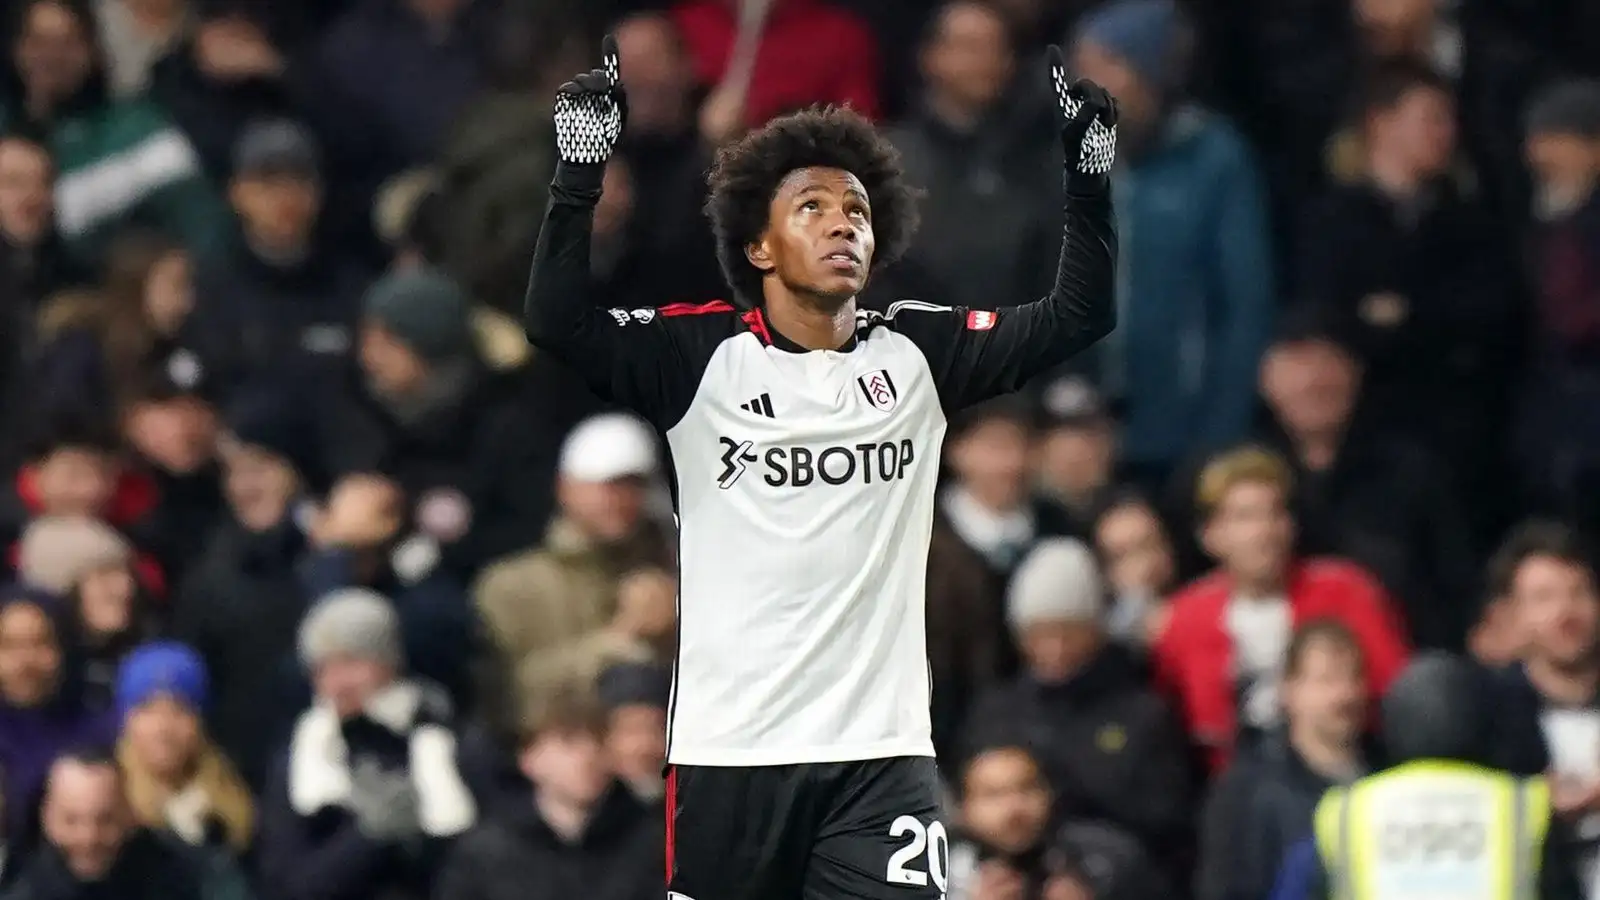 Fulham 3-2 Wolves: Willian scores two, including 94th-minute winner, to down O’Neil’s men